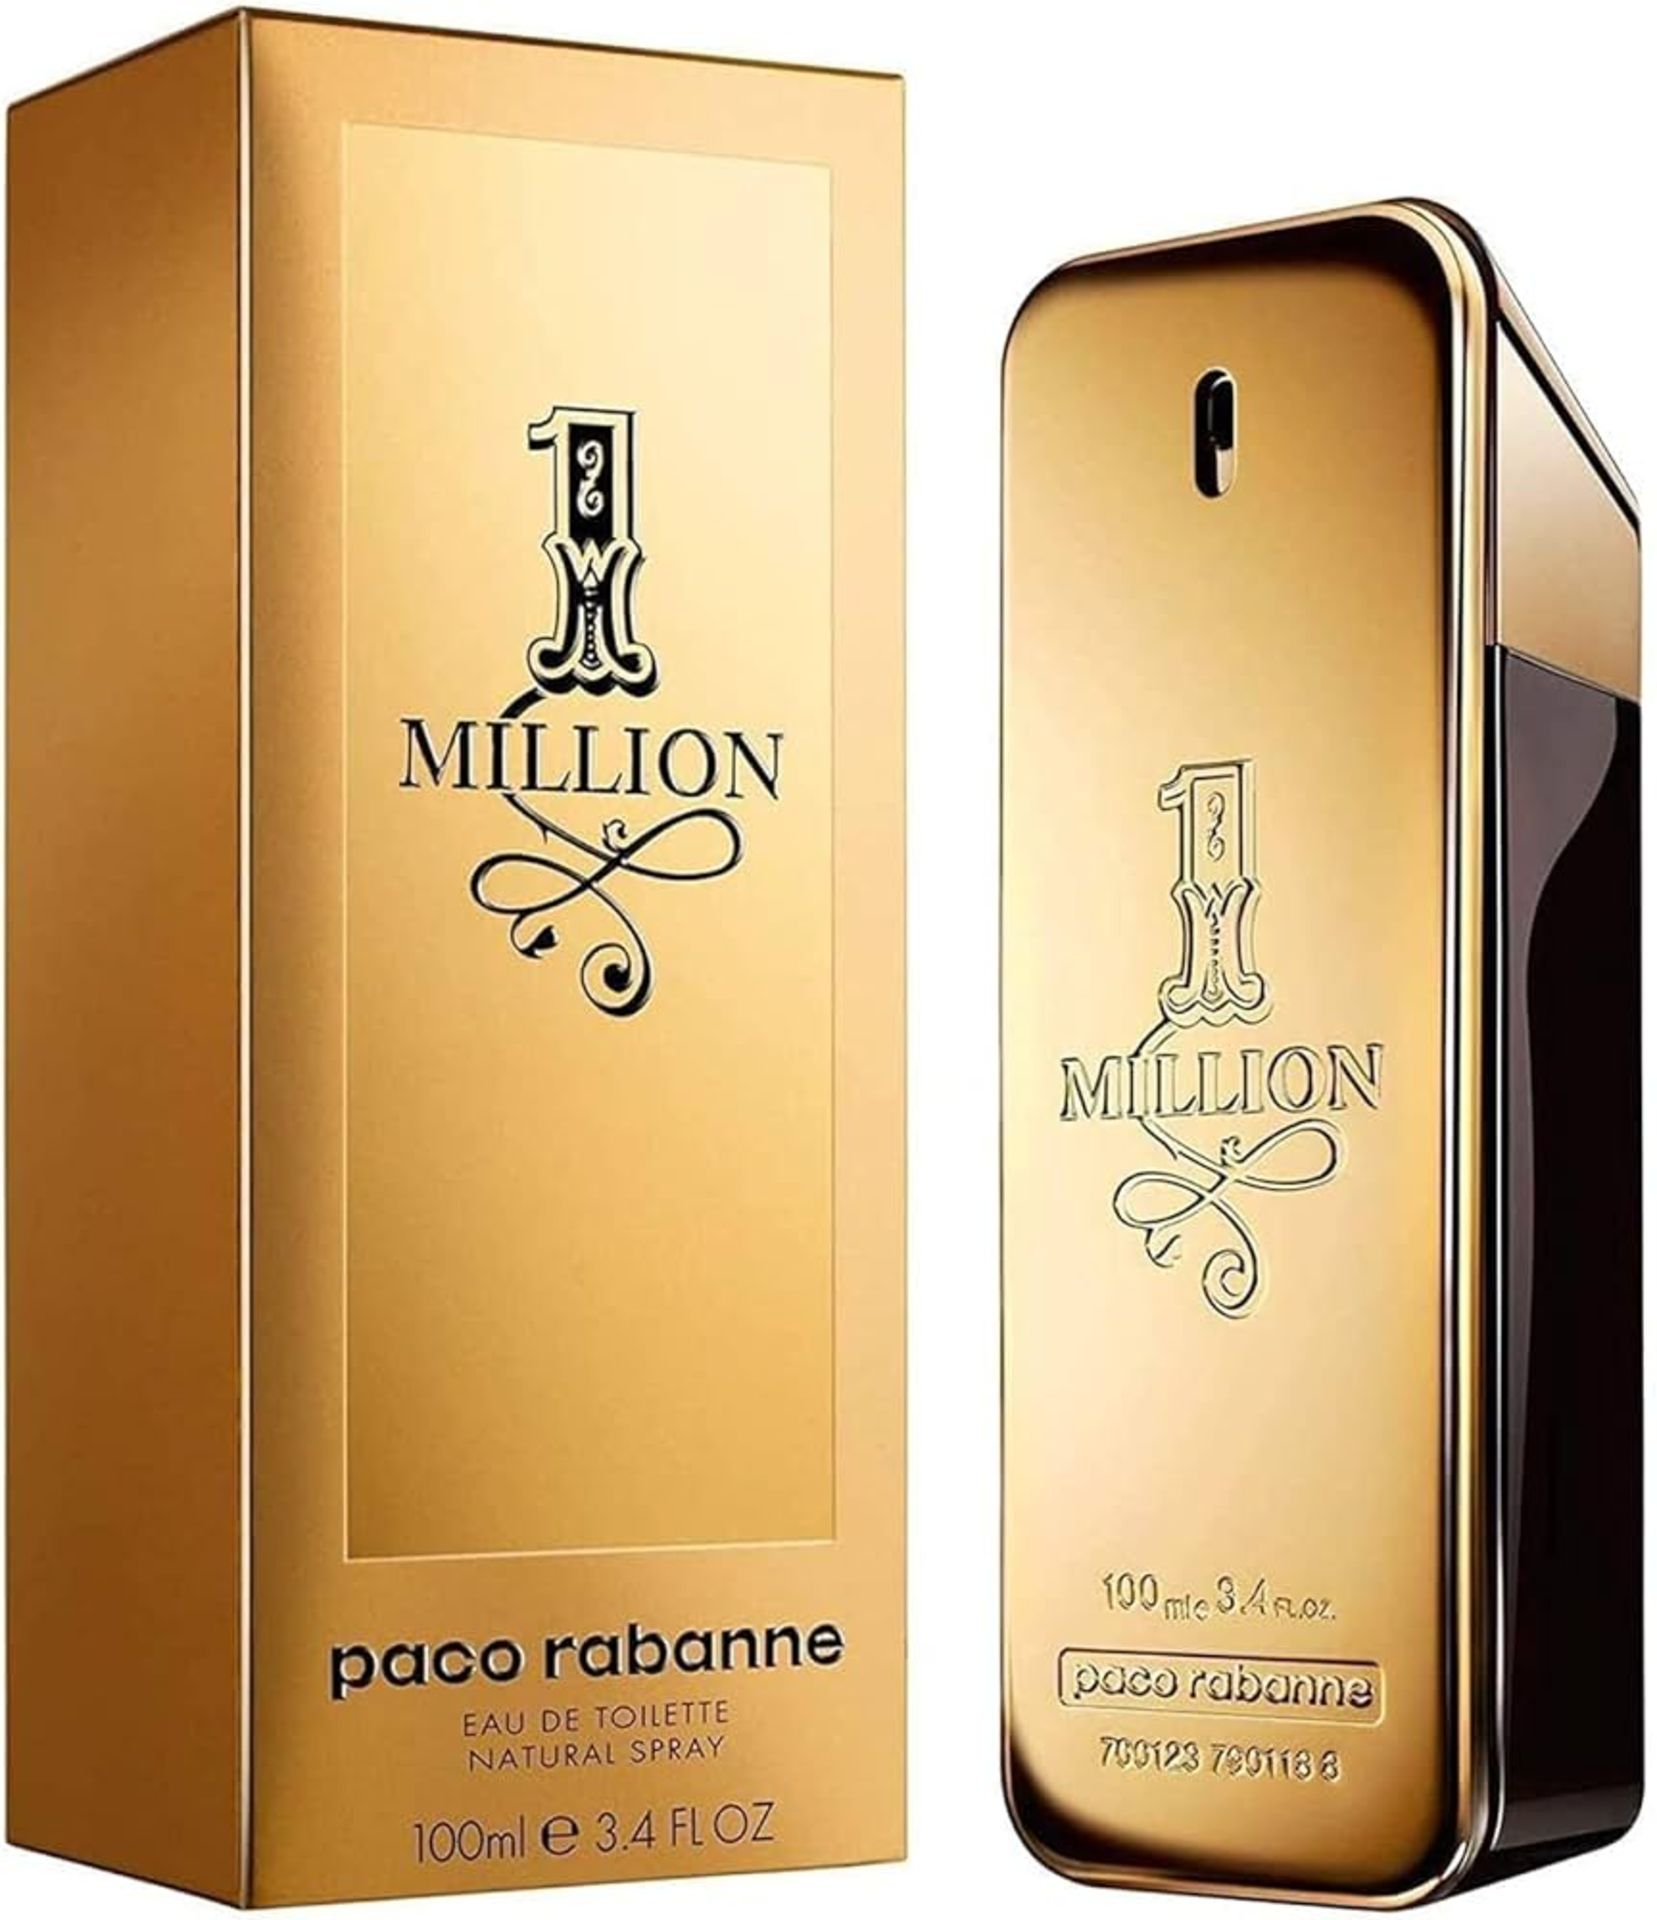 Paco Rabannne 1 Million 100ml (Delivery Band A)